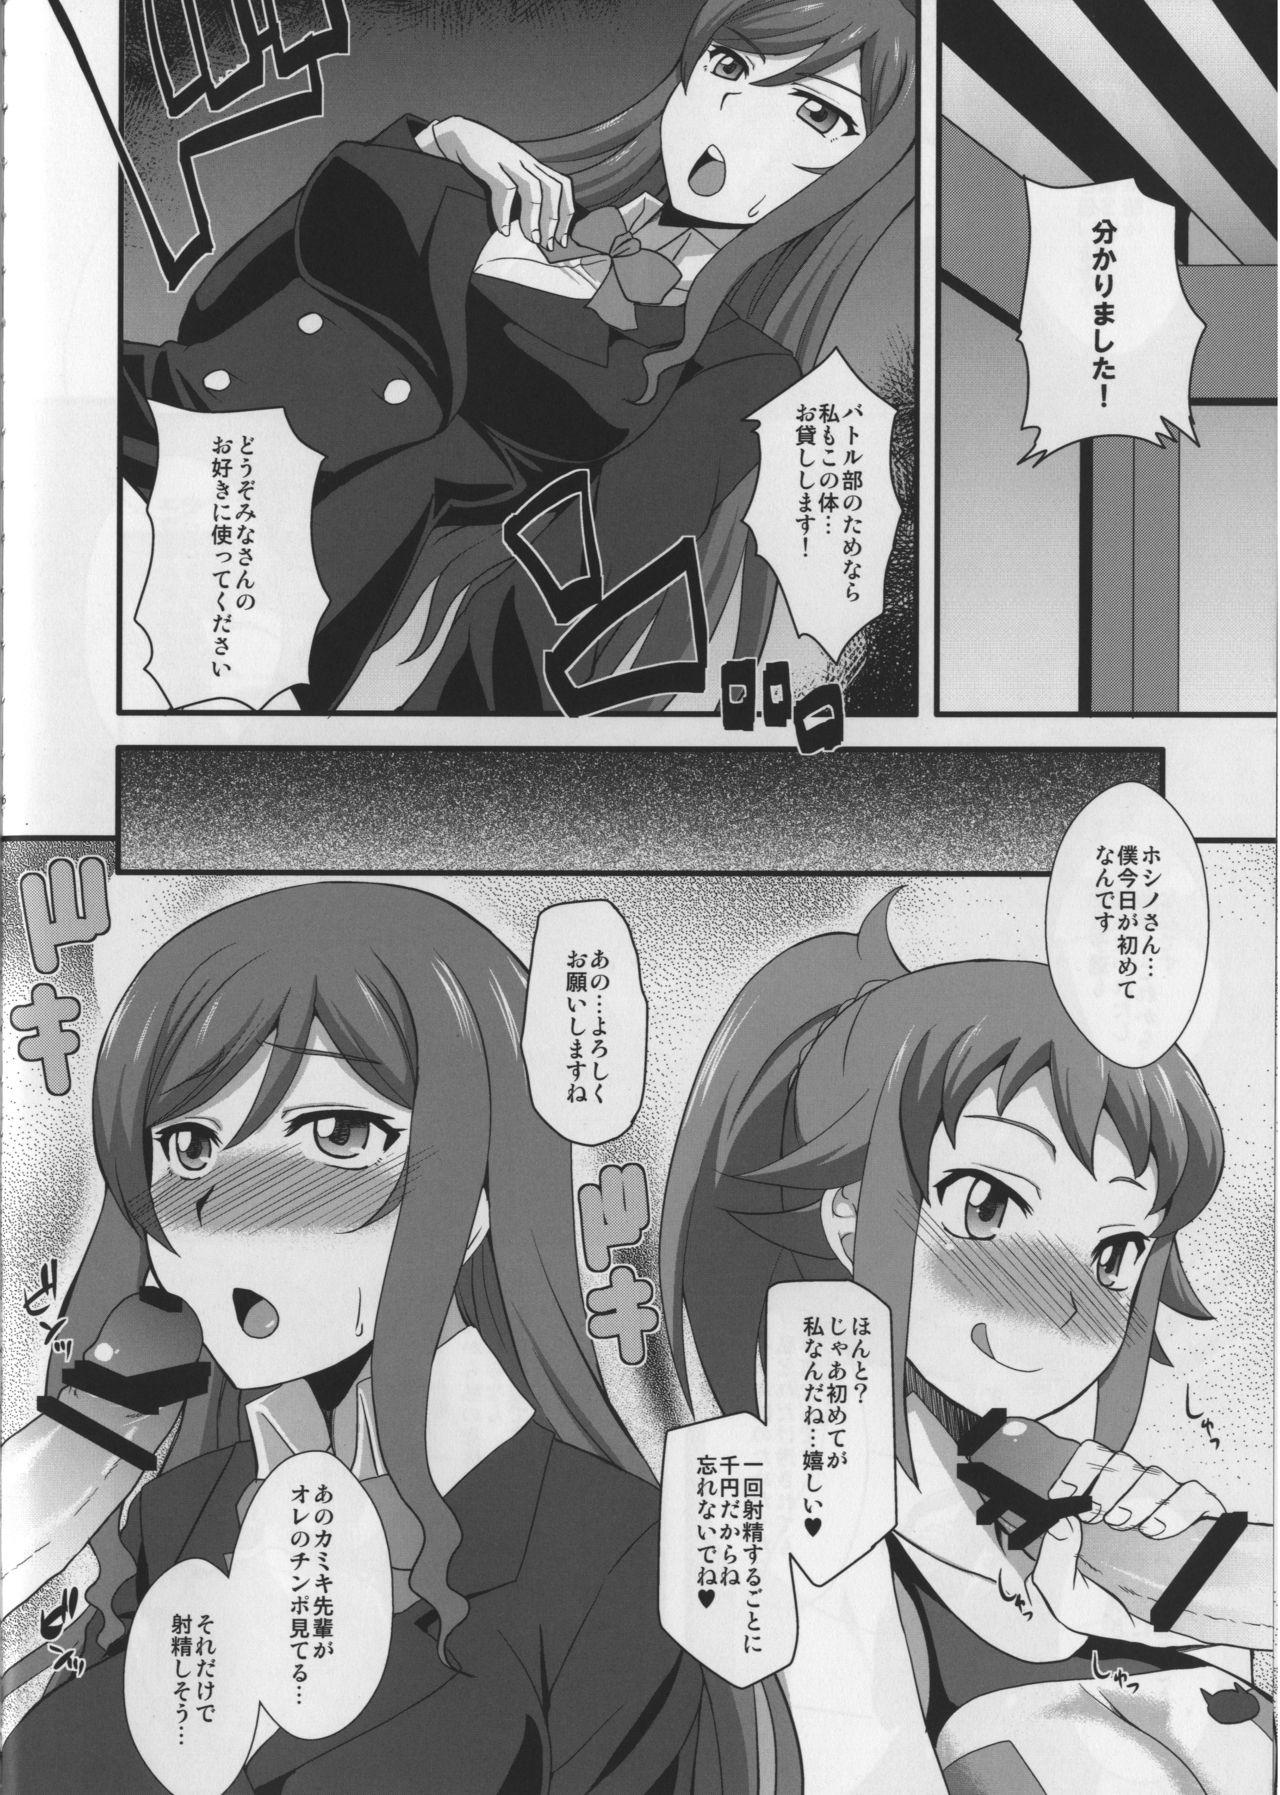 Hardcoresex Sex Fighters TRY - Gundam build fighters try Lesbians - Page 6